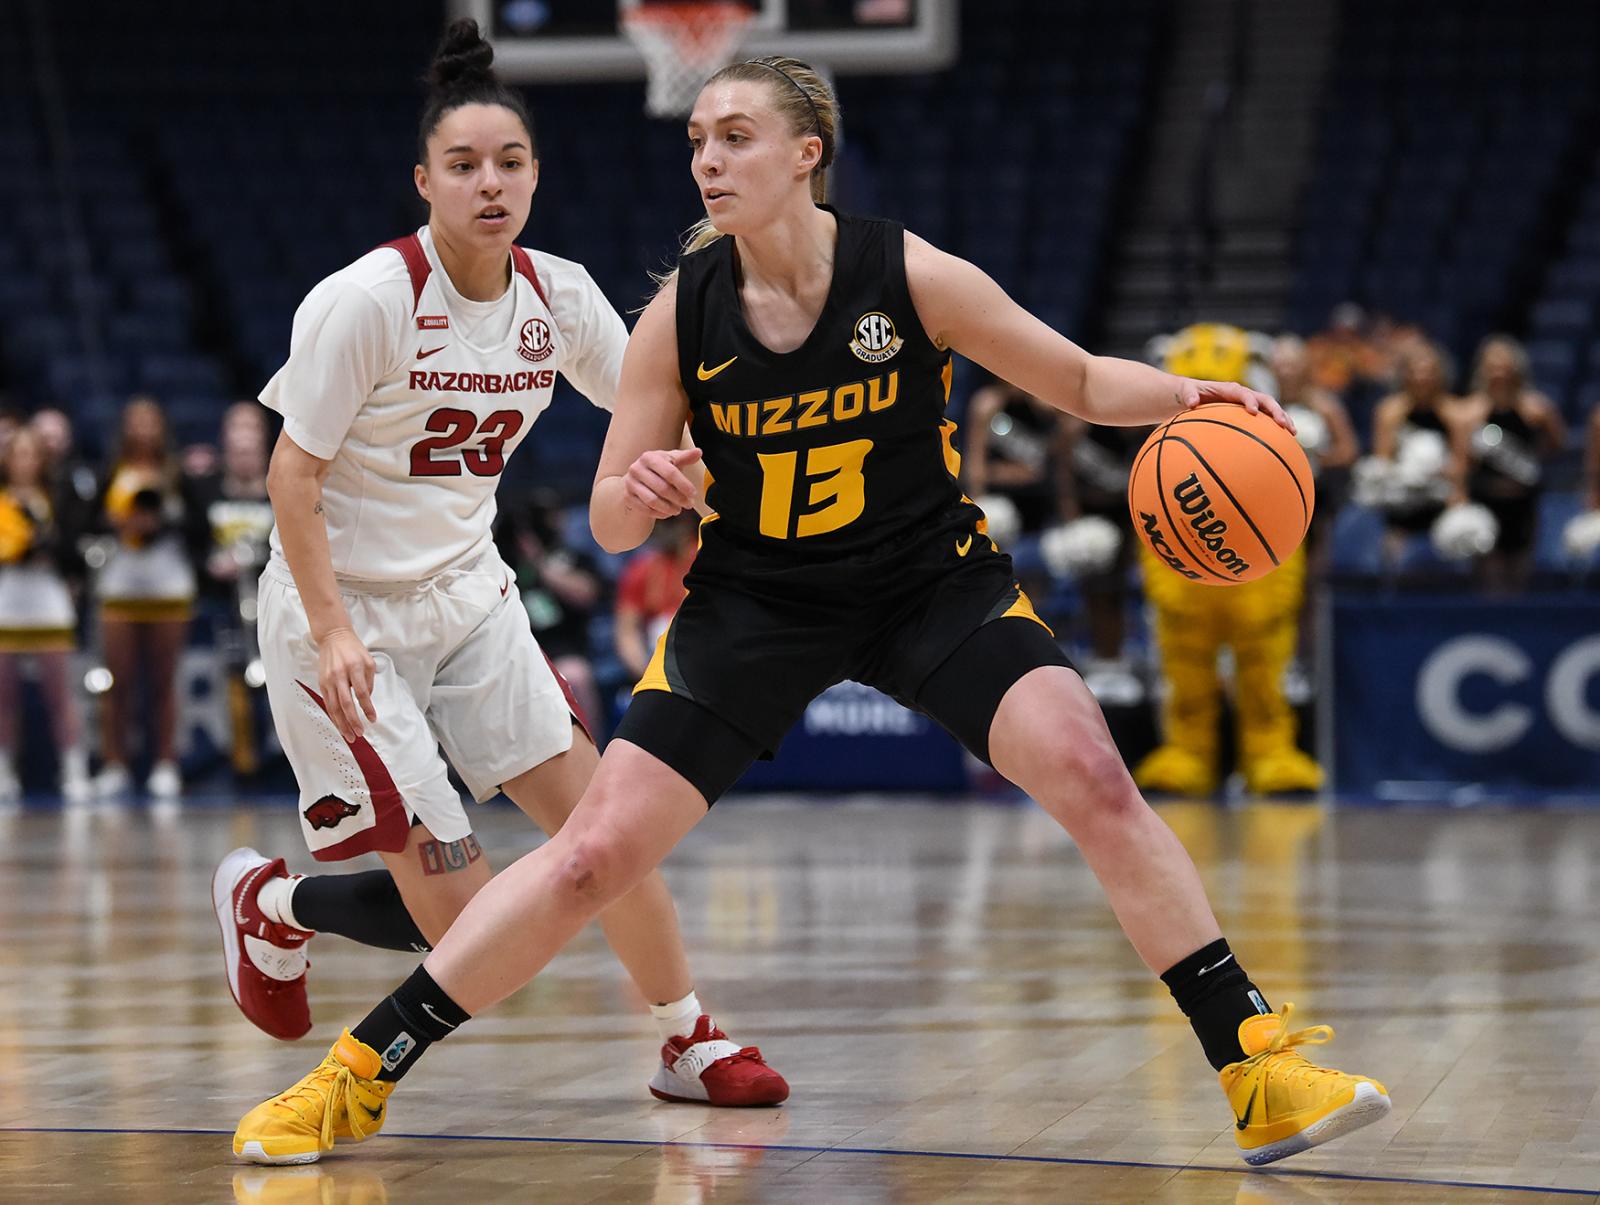 Image from Singles - Haley Troup dribbles the ball on Thursday, March 3, 2022...